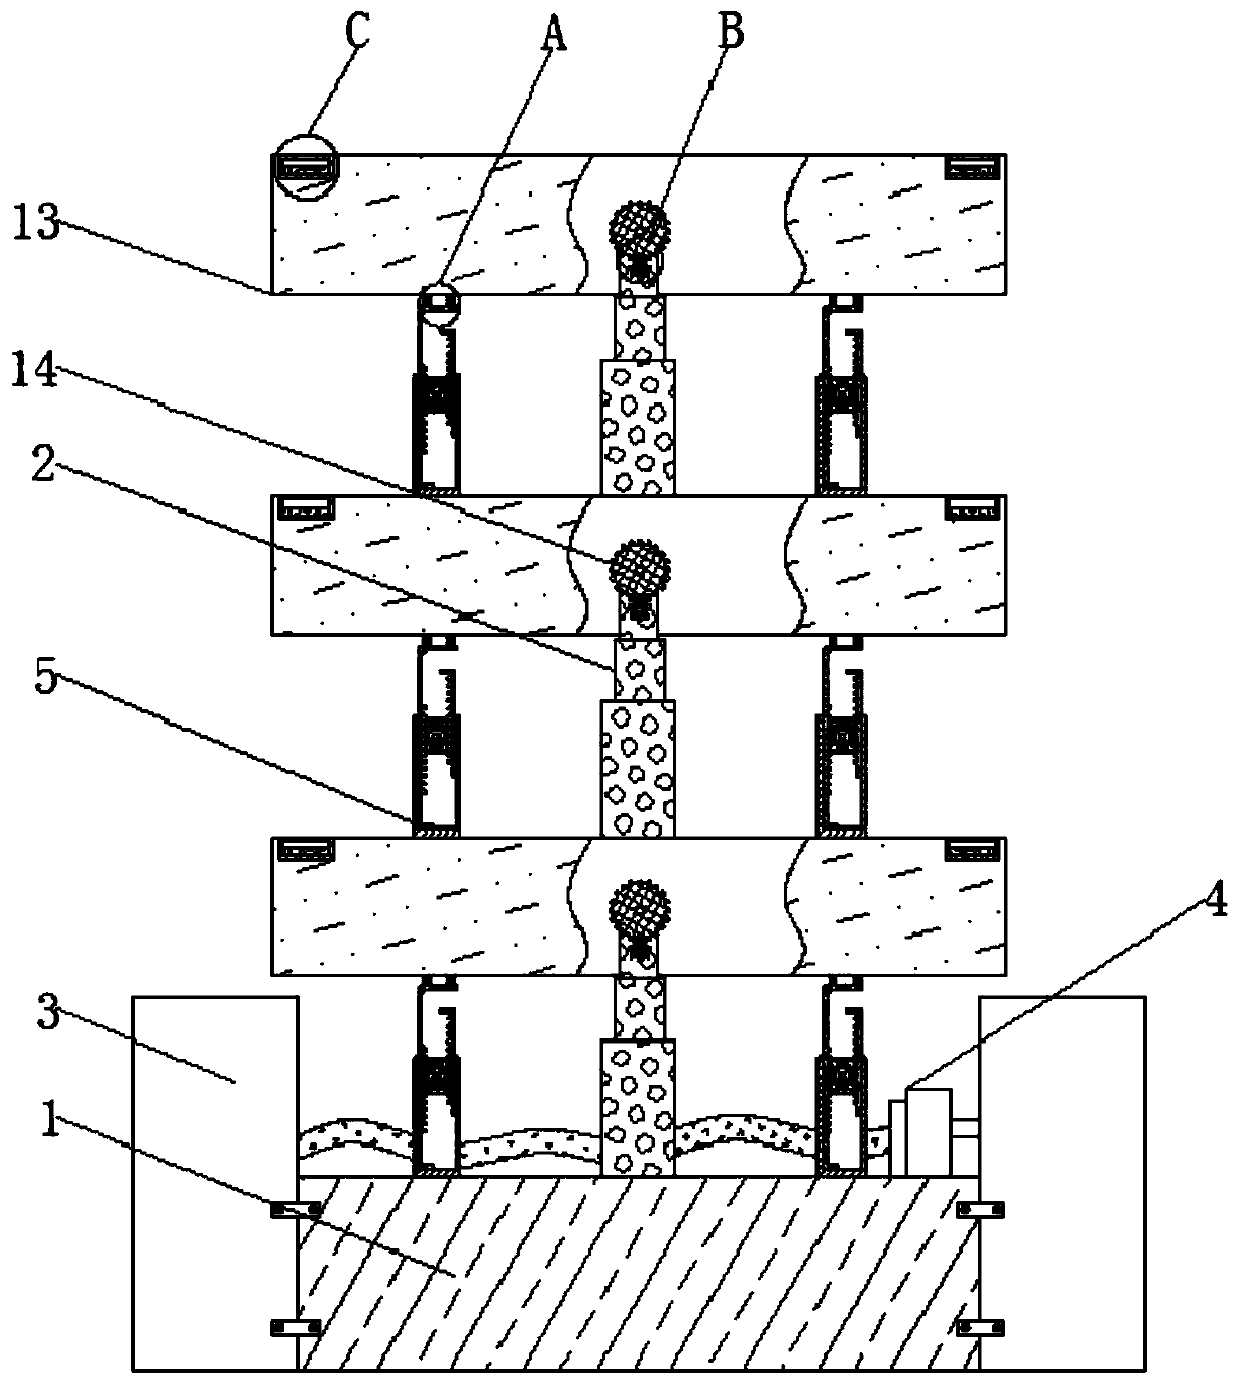 Photoinduction control-based light-chasing hydroponic vegetable cultivation device